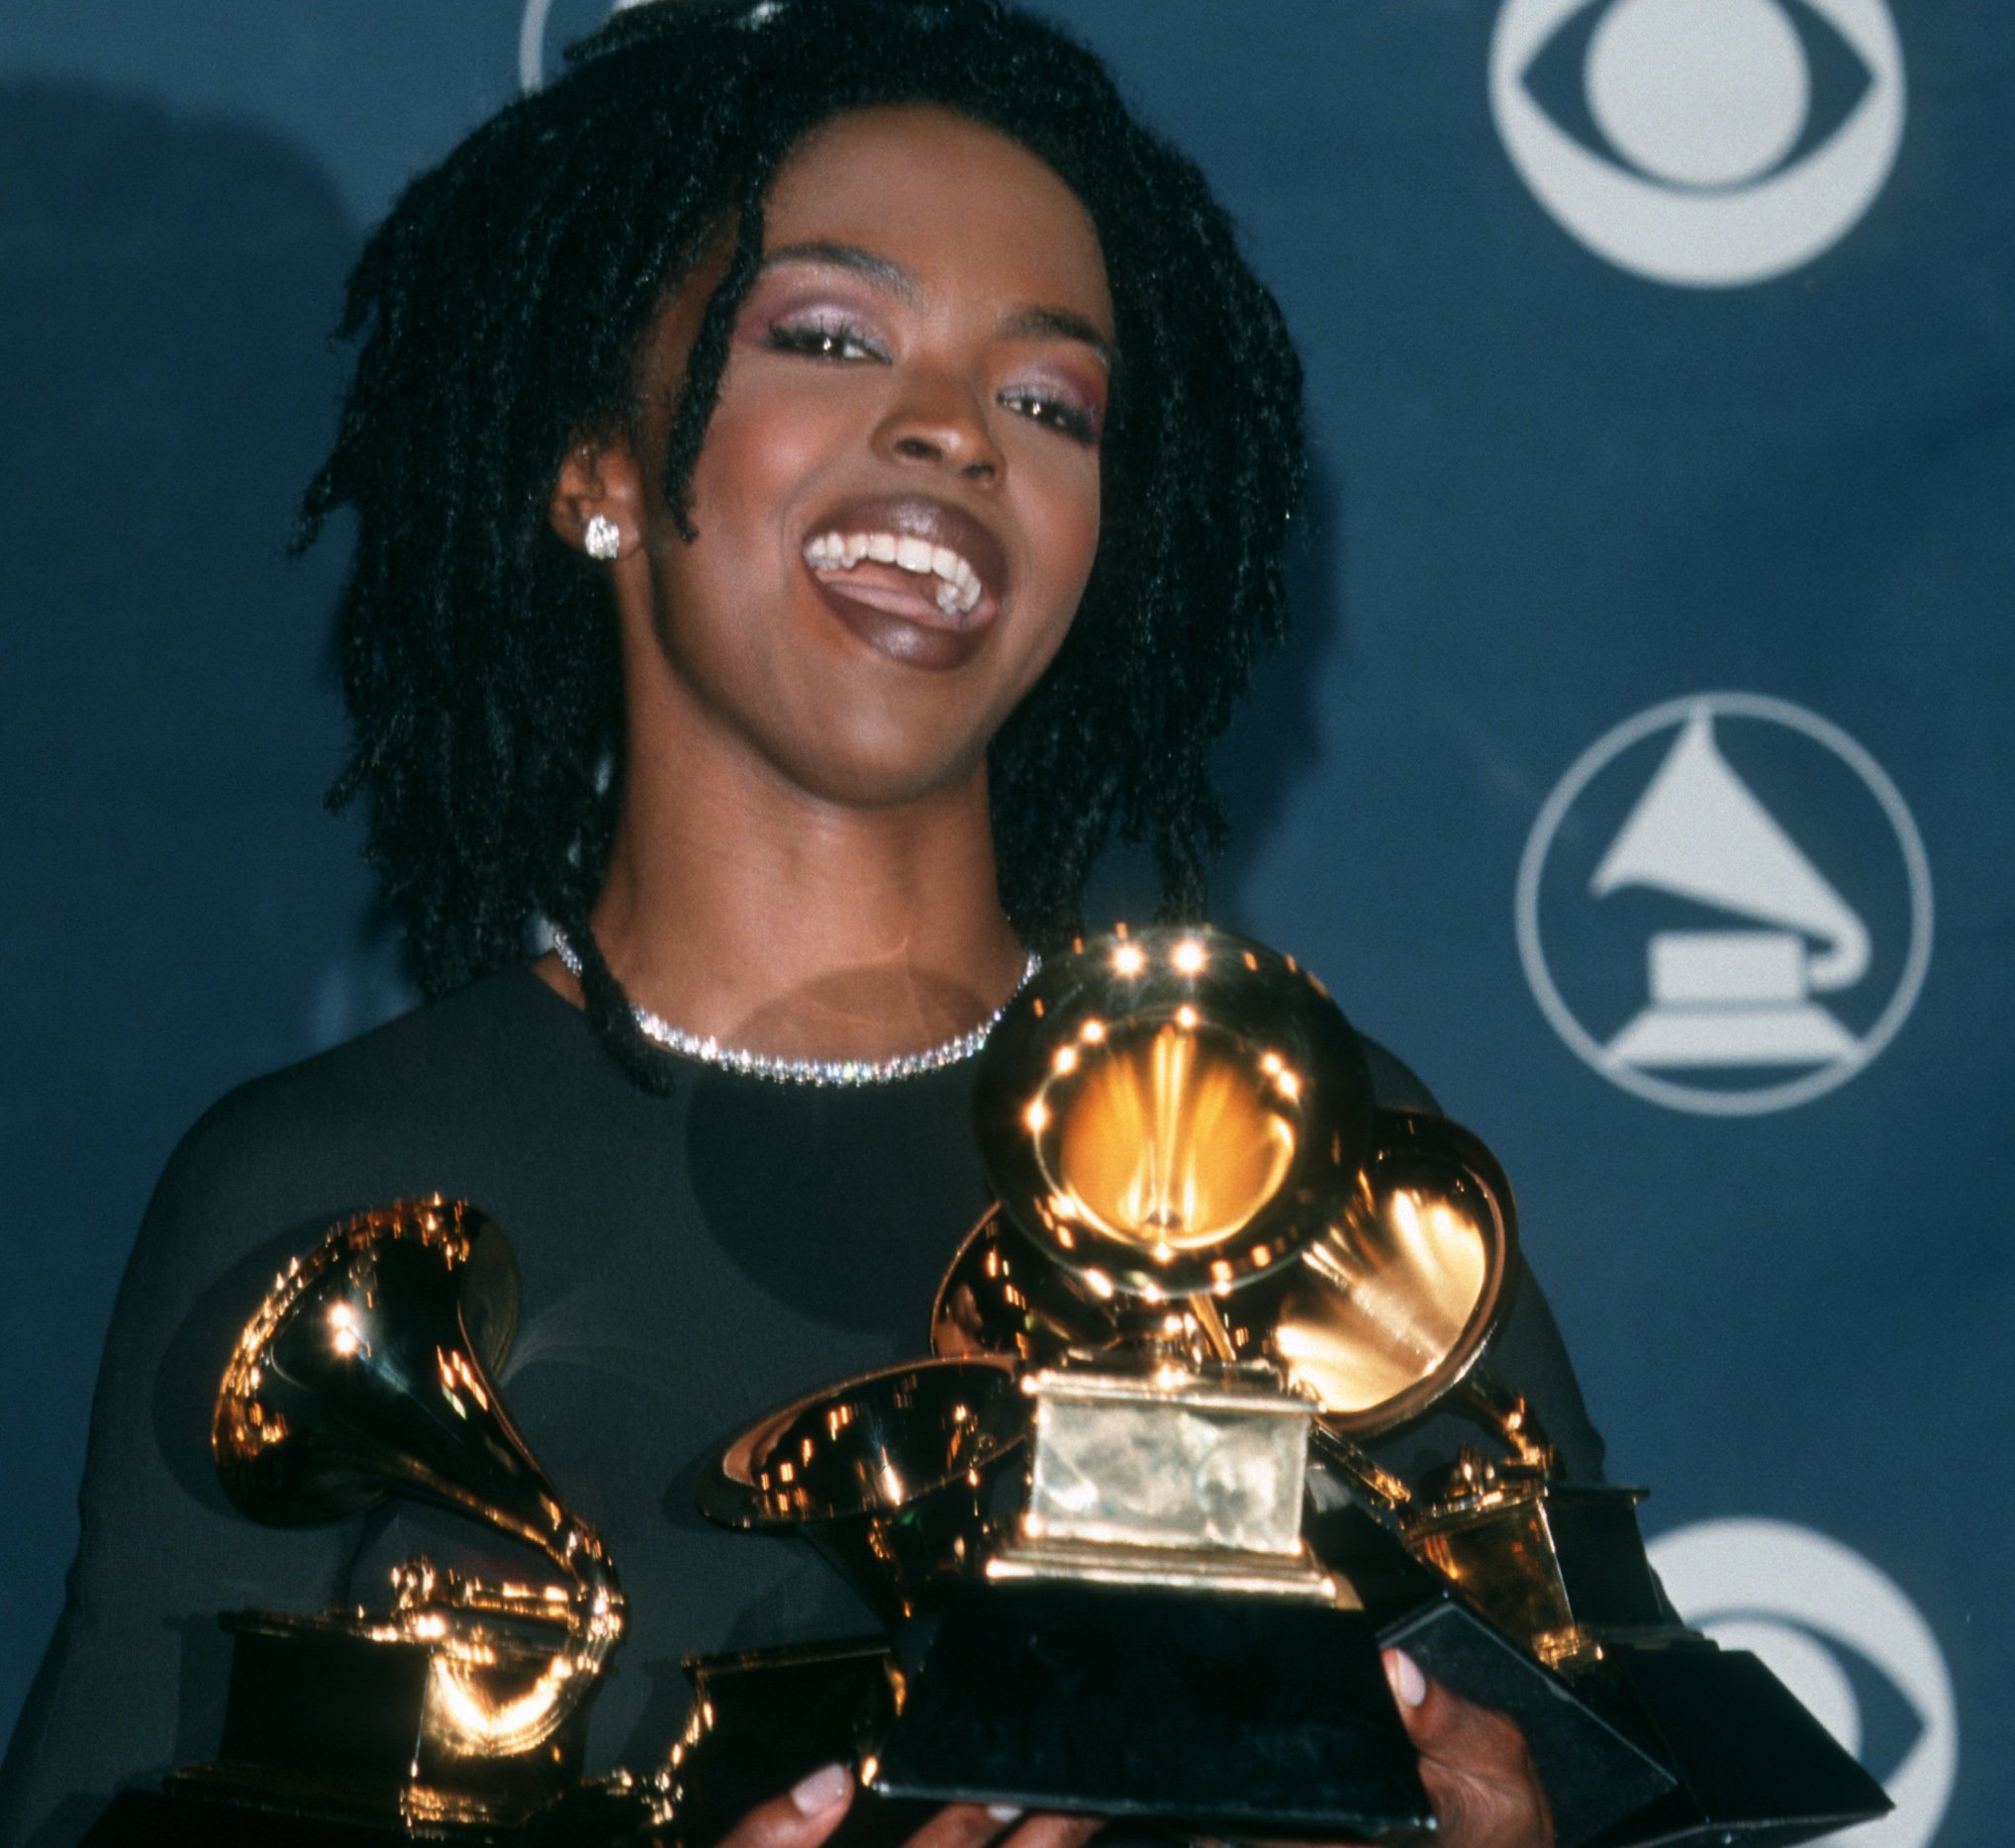 The 41st Annual GRAMMY Awards